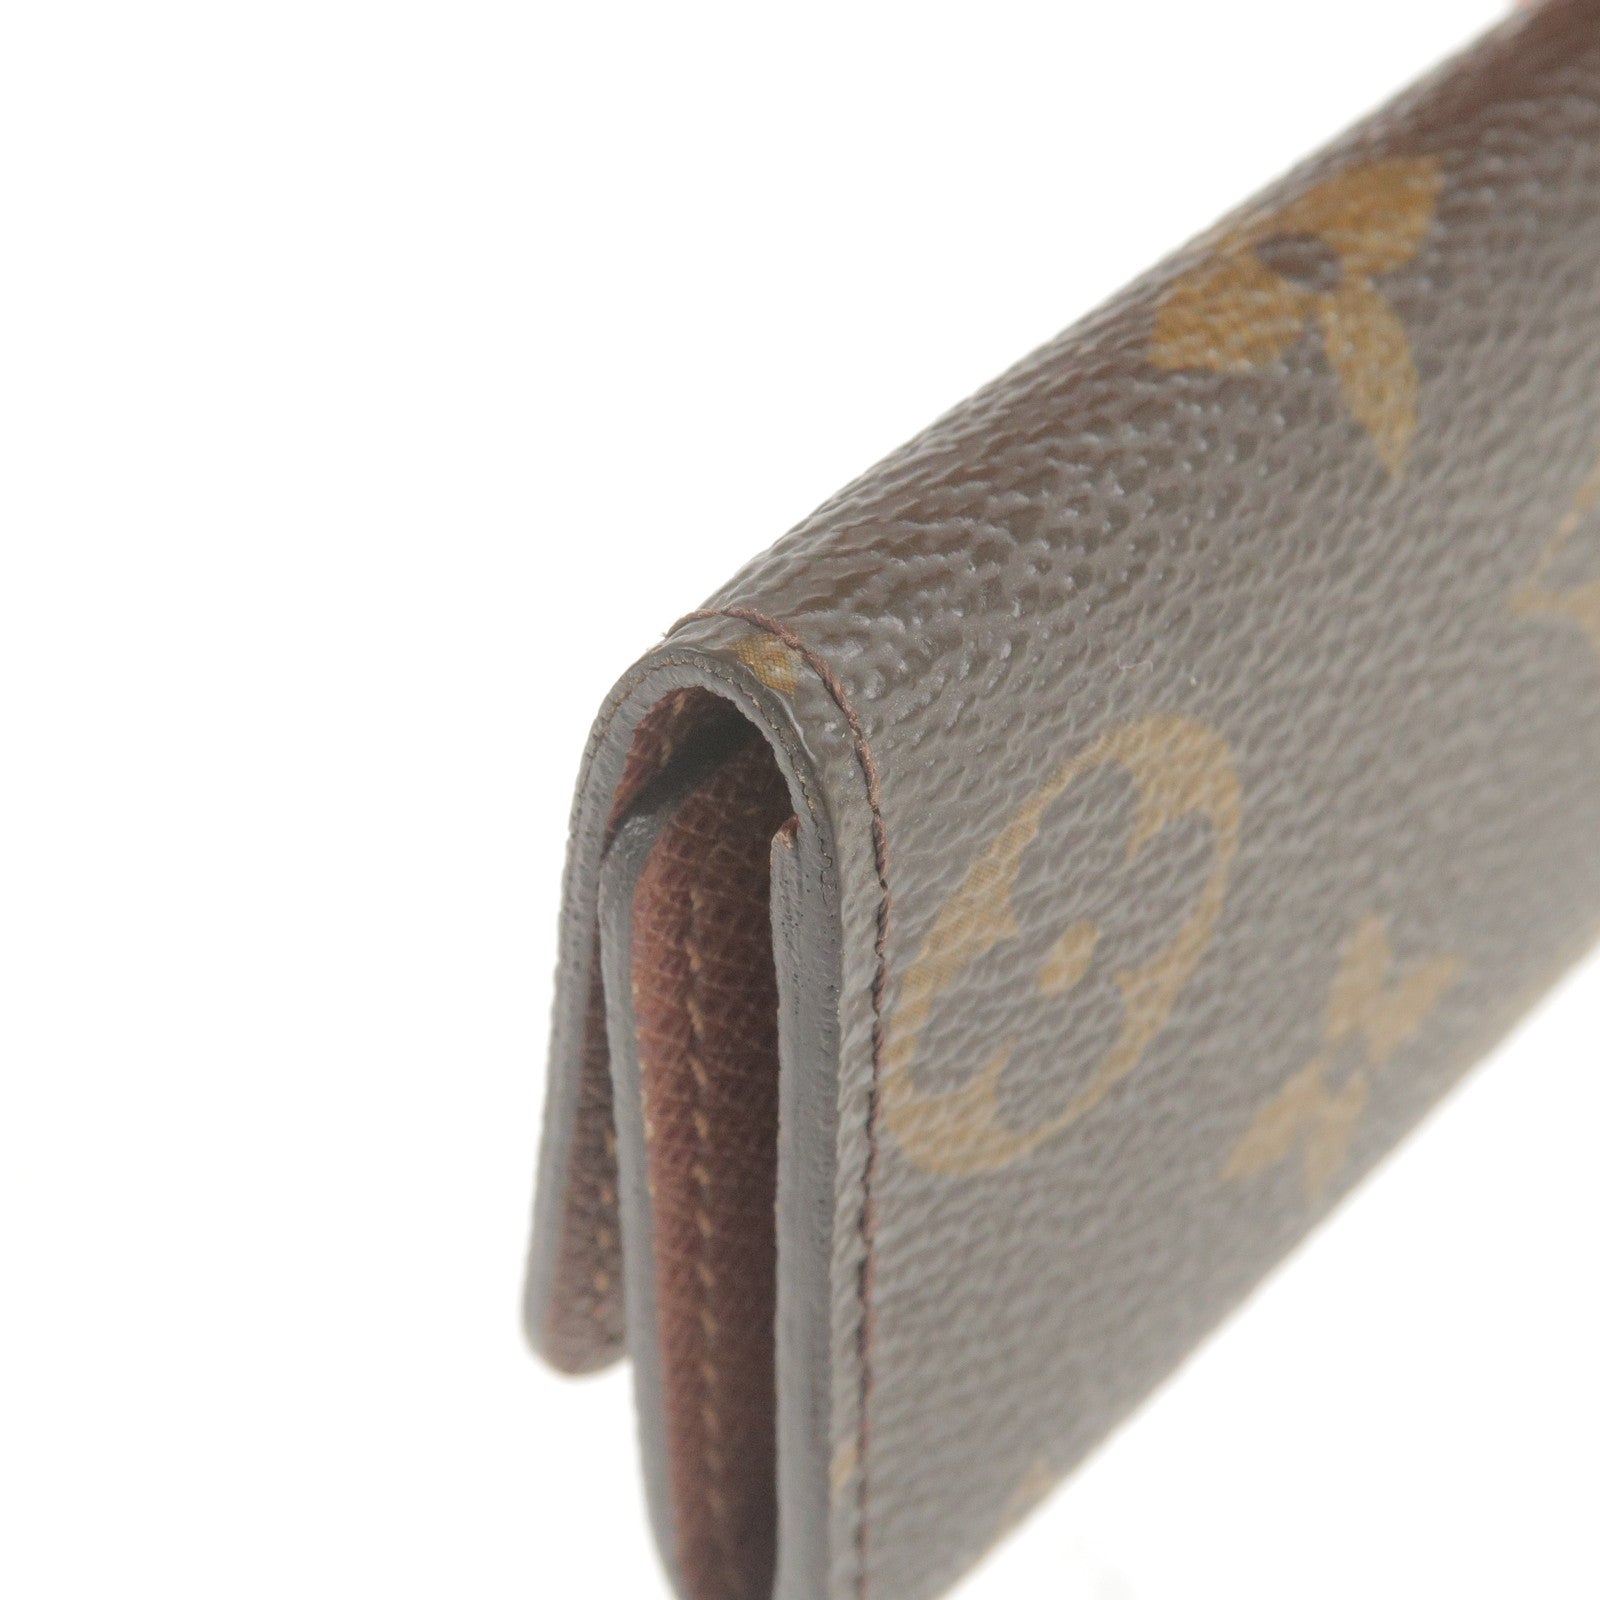 Louis Vuitton Monogram 6 Canvas Key Holder (pre-owned) in Brown